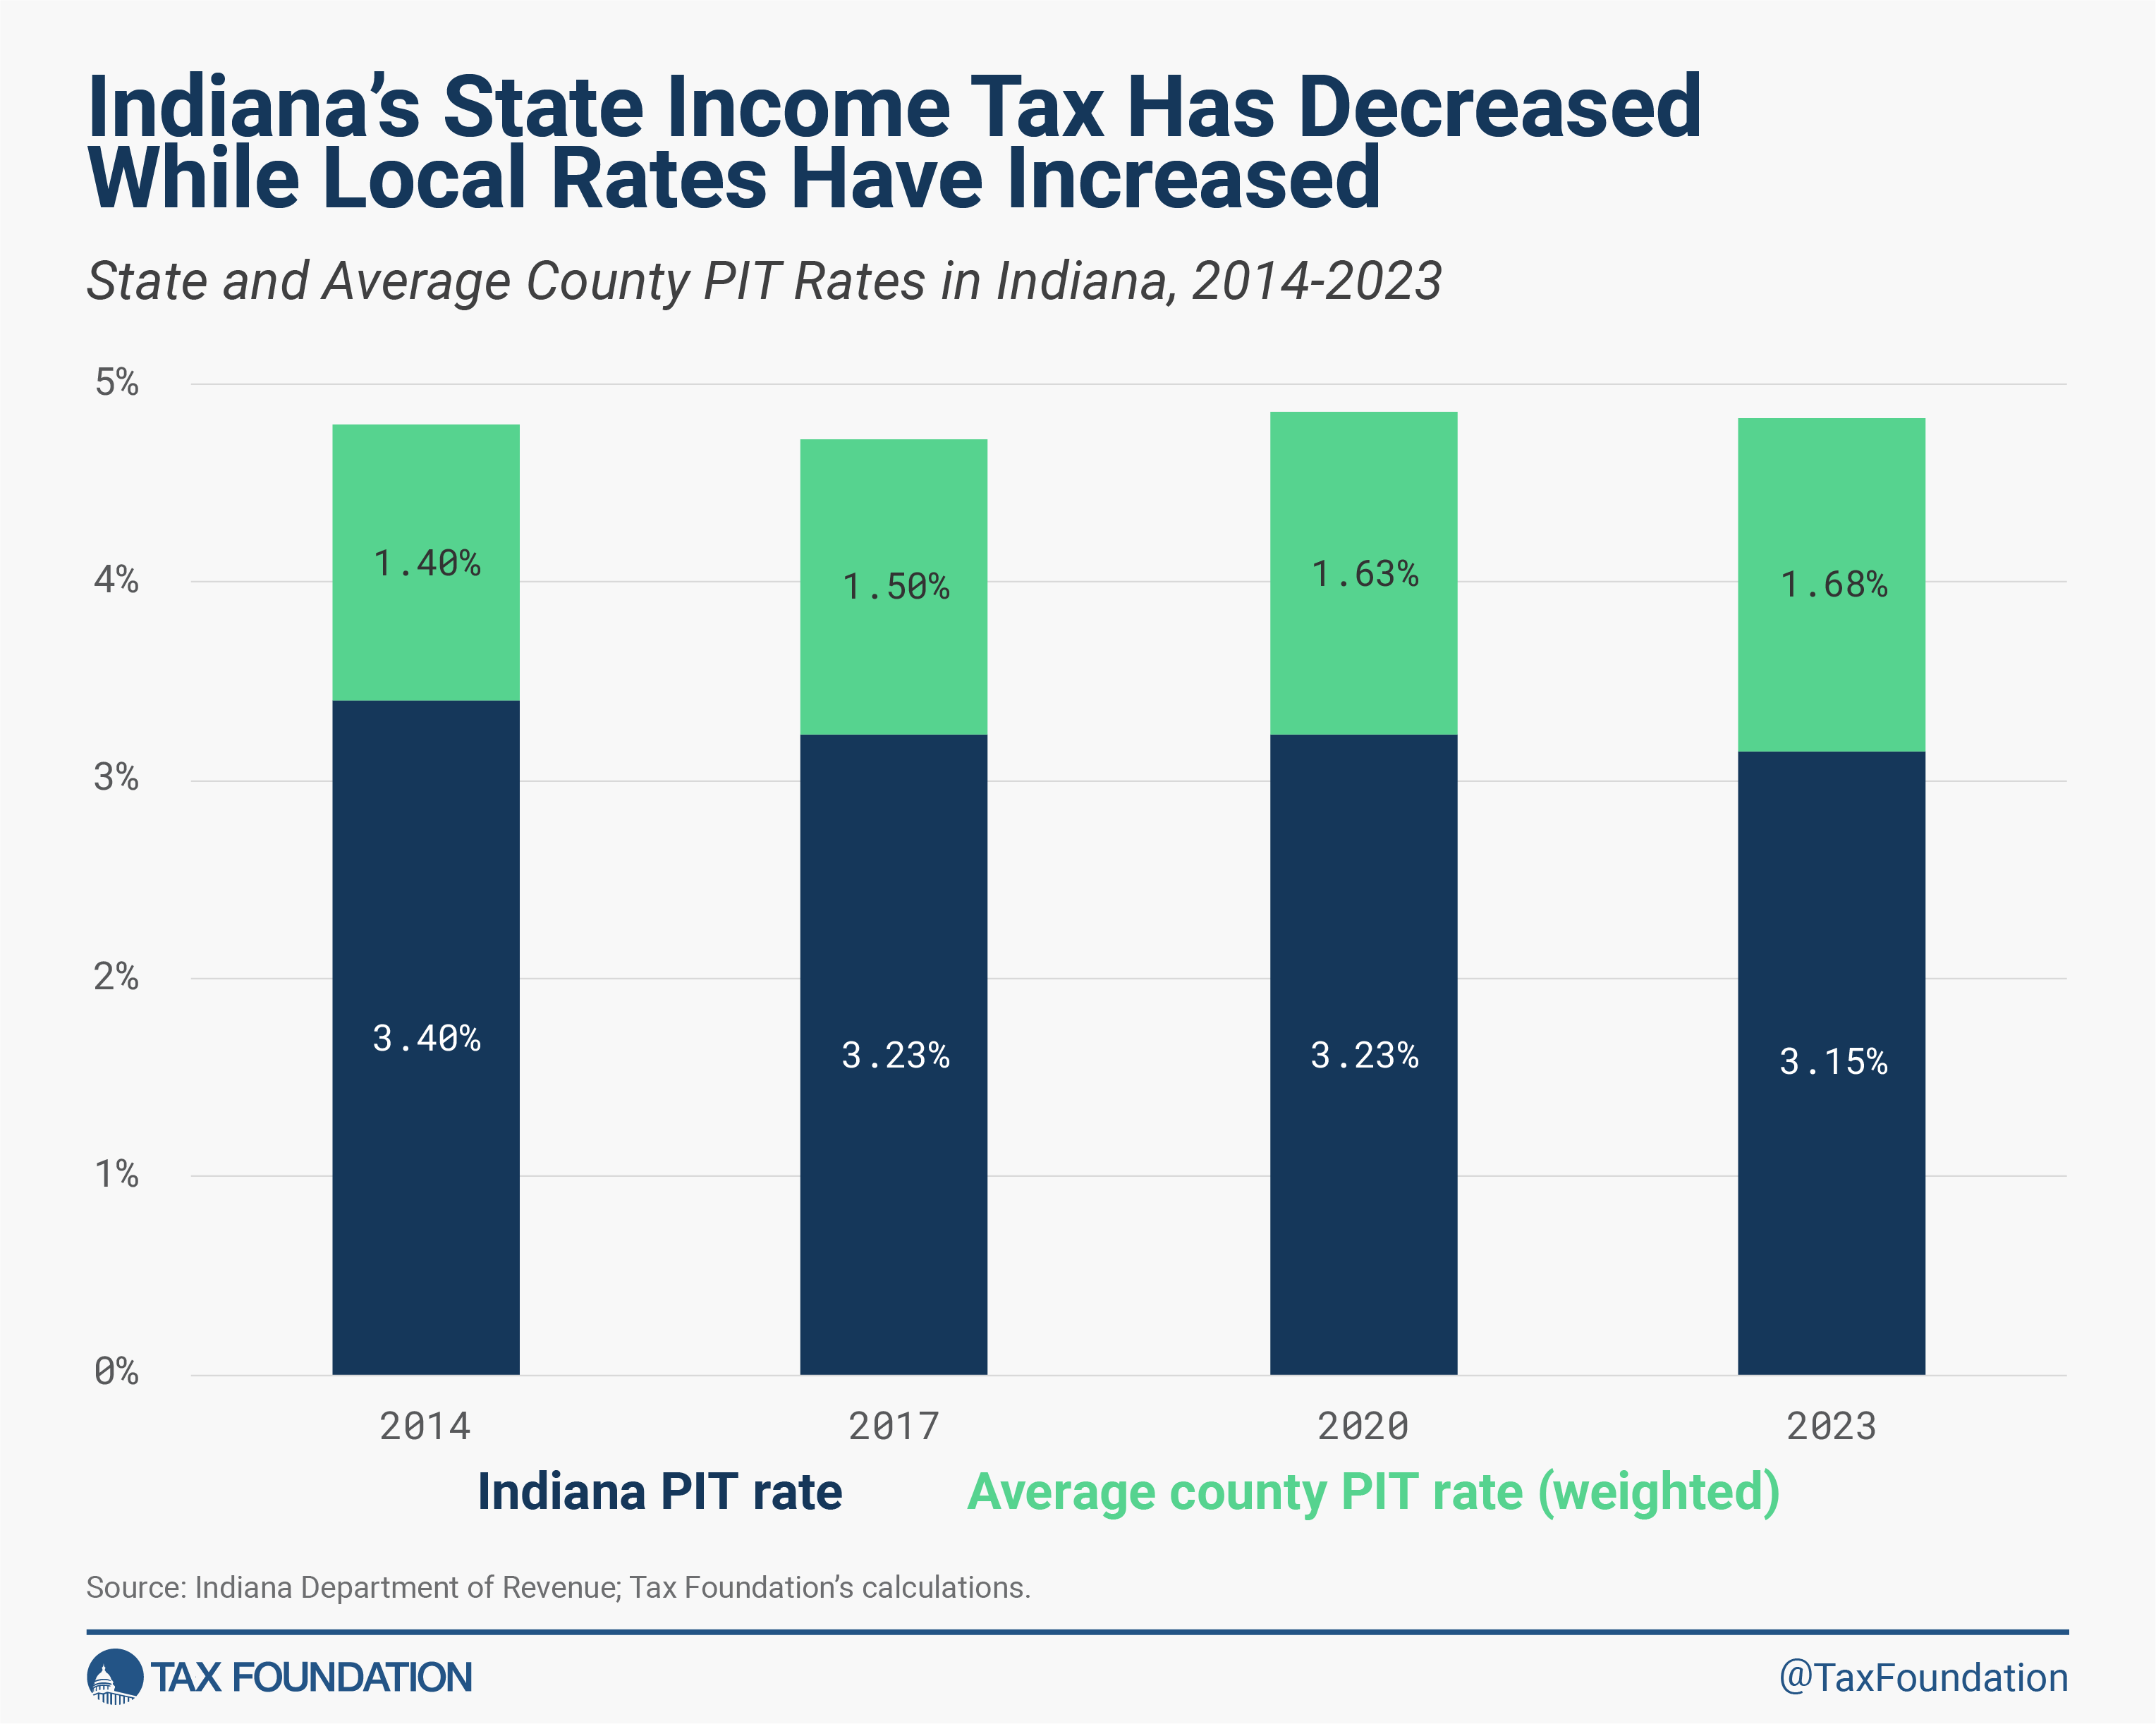 Indiana income tax reform and Indiana local income taxes and rates